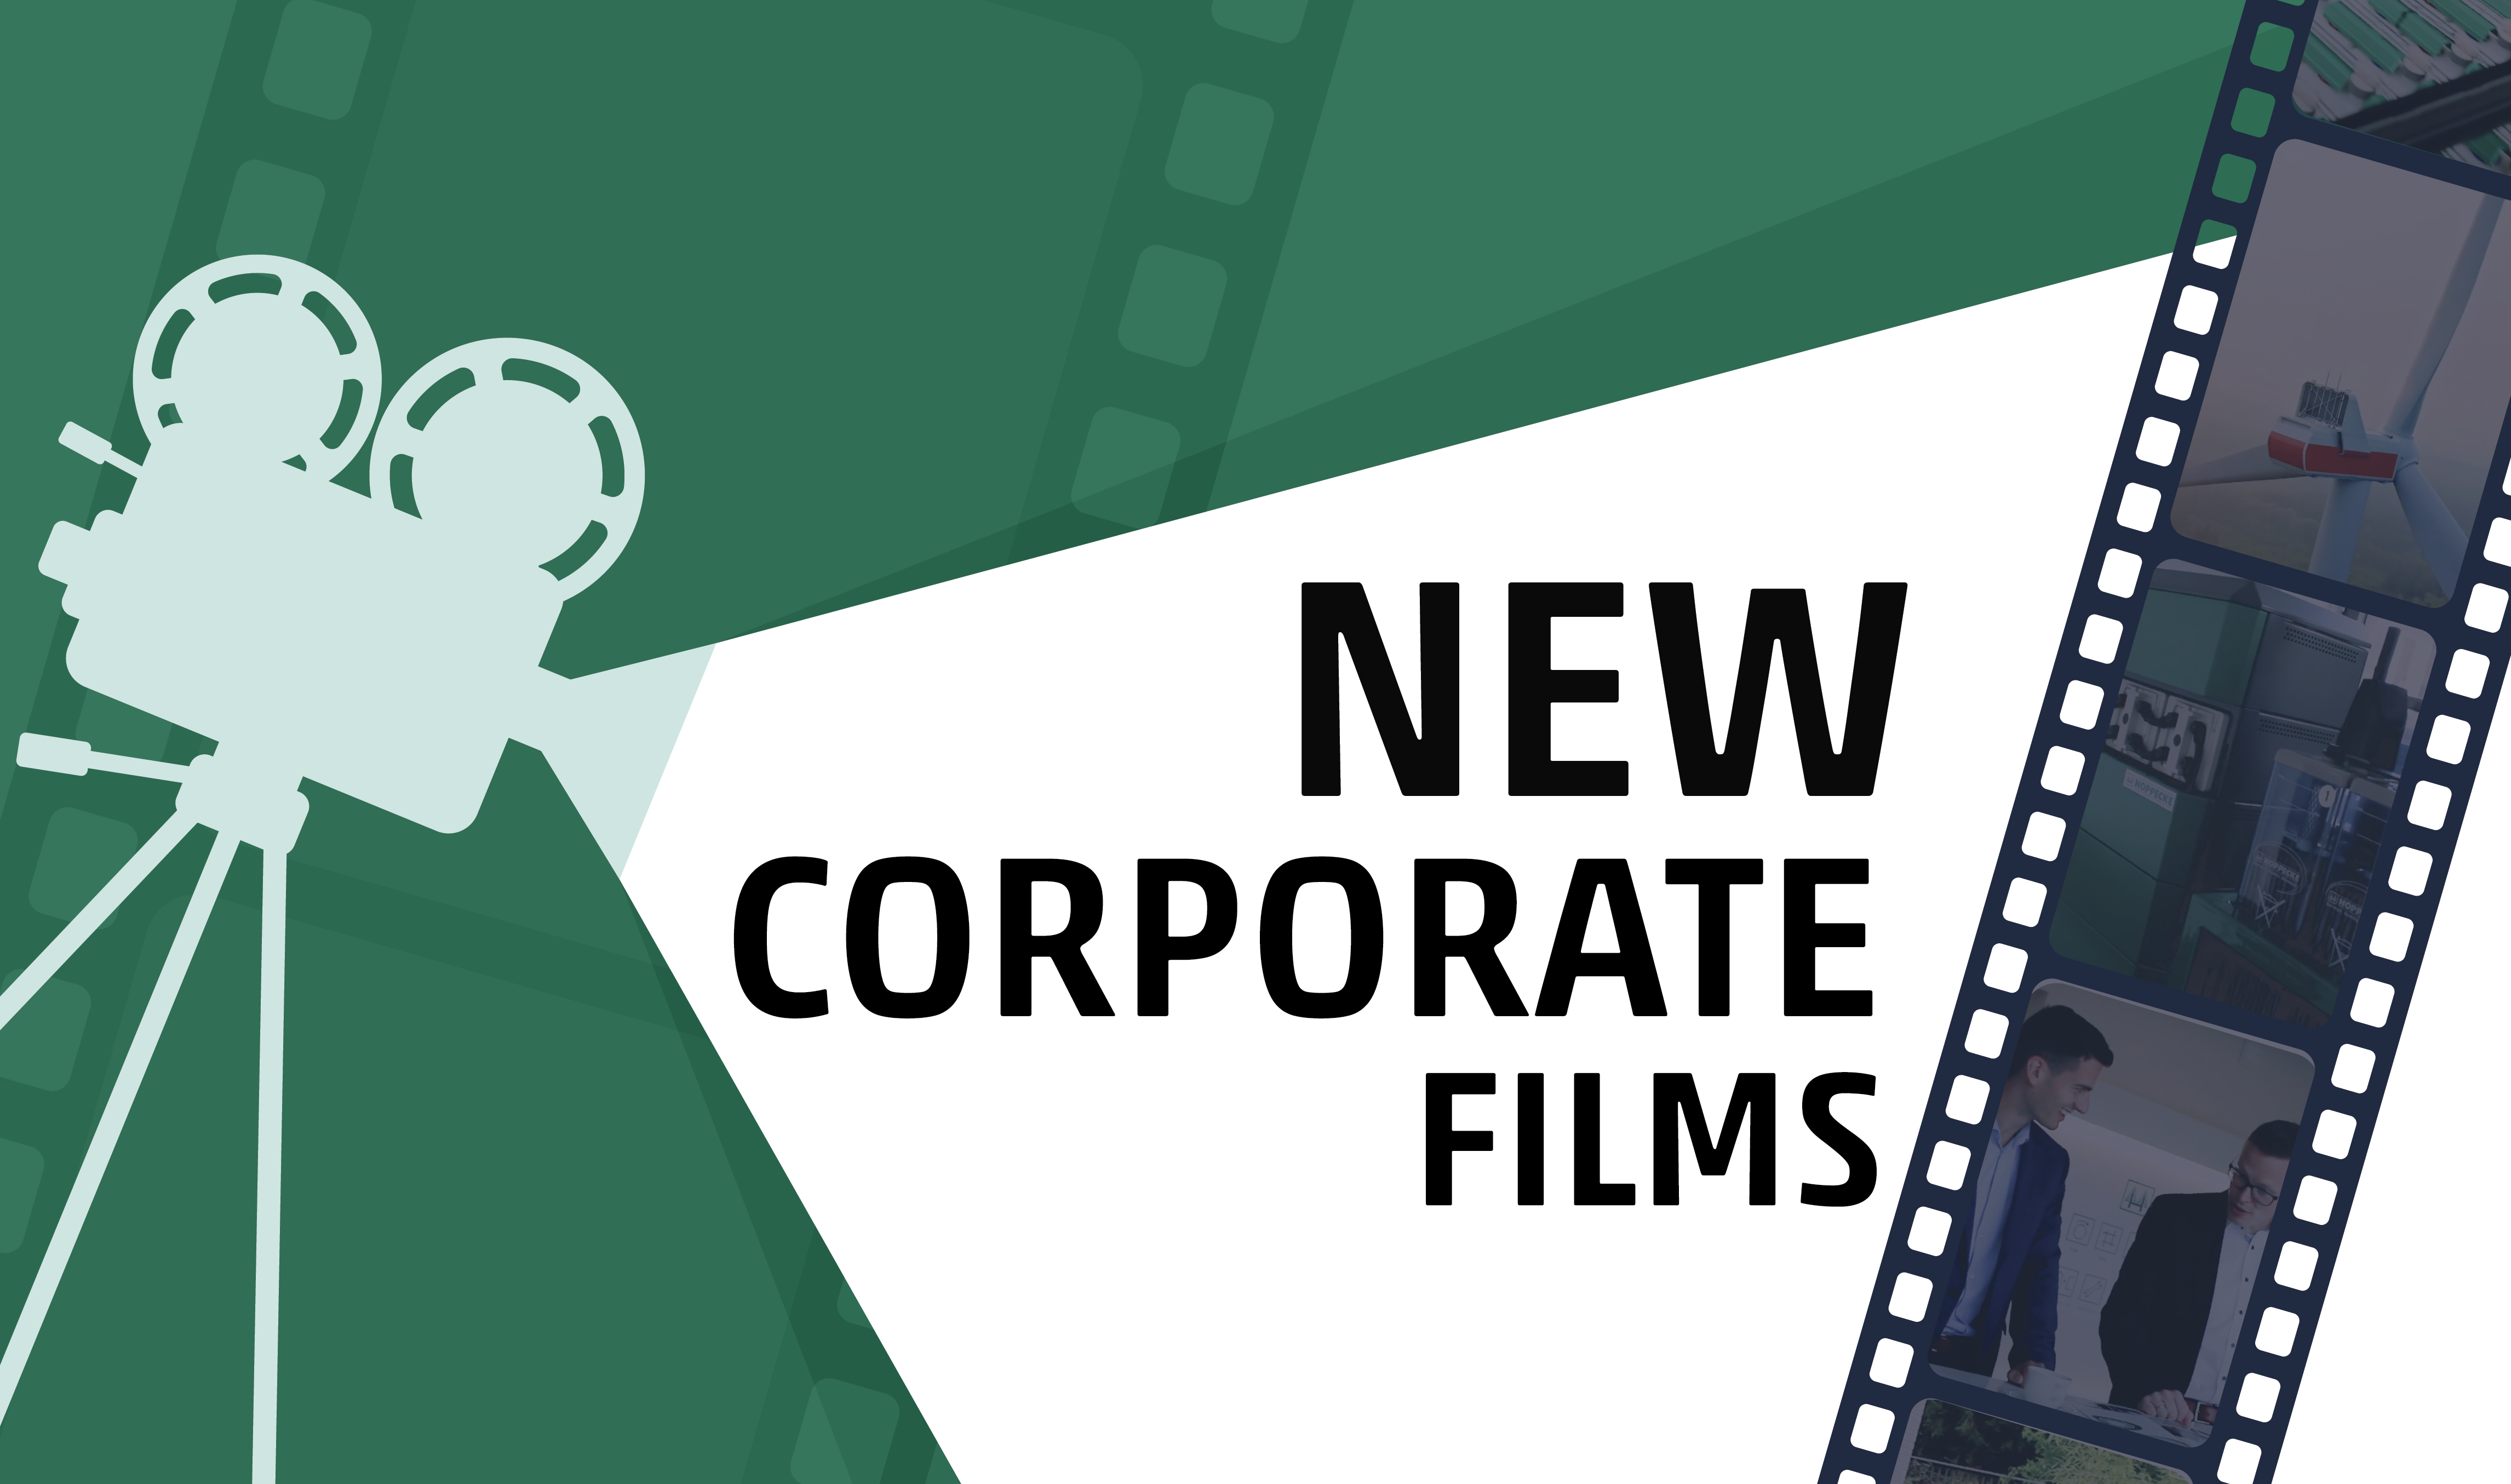 Curtain up for our new corporate films! - Monday, 11.07.2022